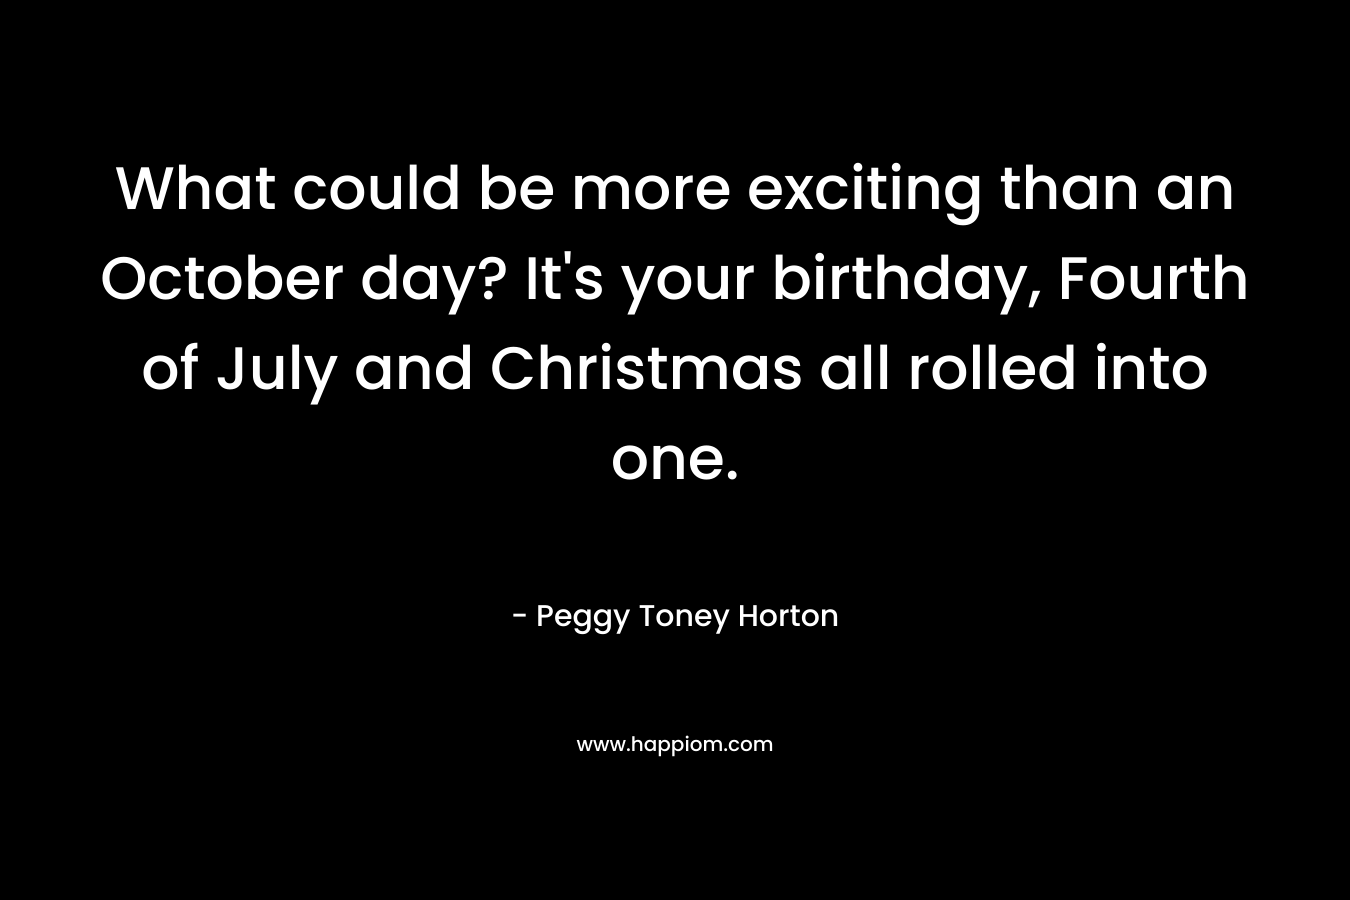 What could be more exciting than an October day? It’s your birthday, Fourth of July and Christmas all rolled into one. – Peggy Toney Horton